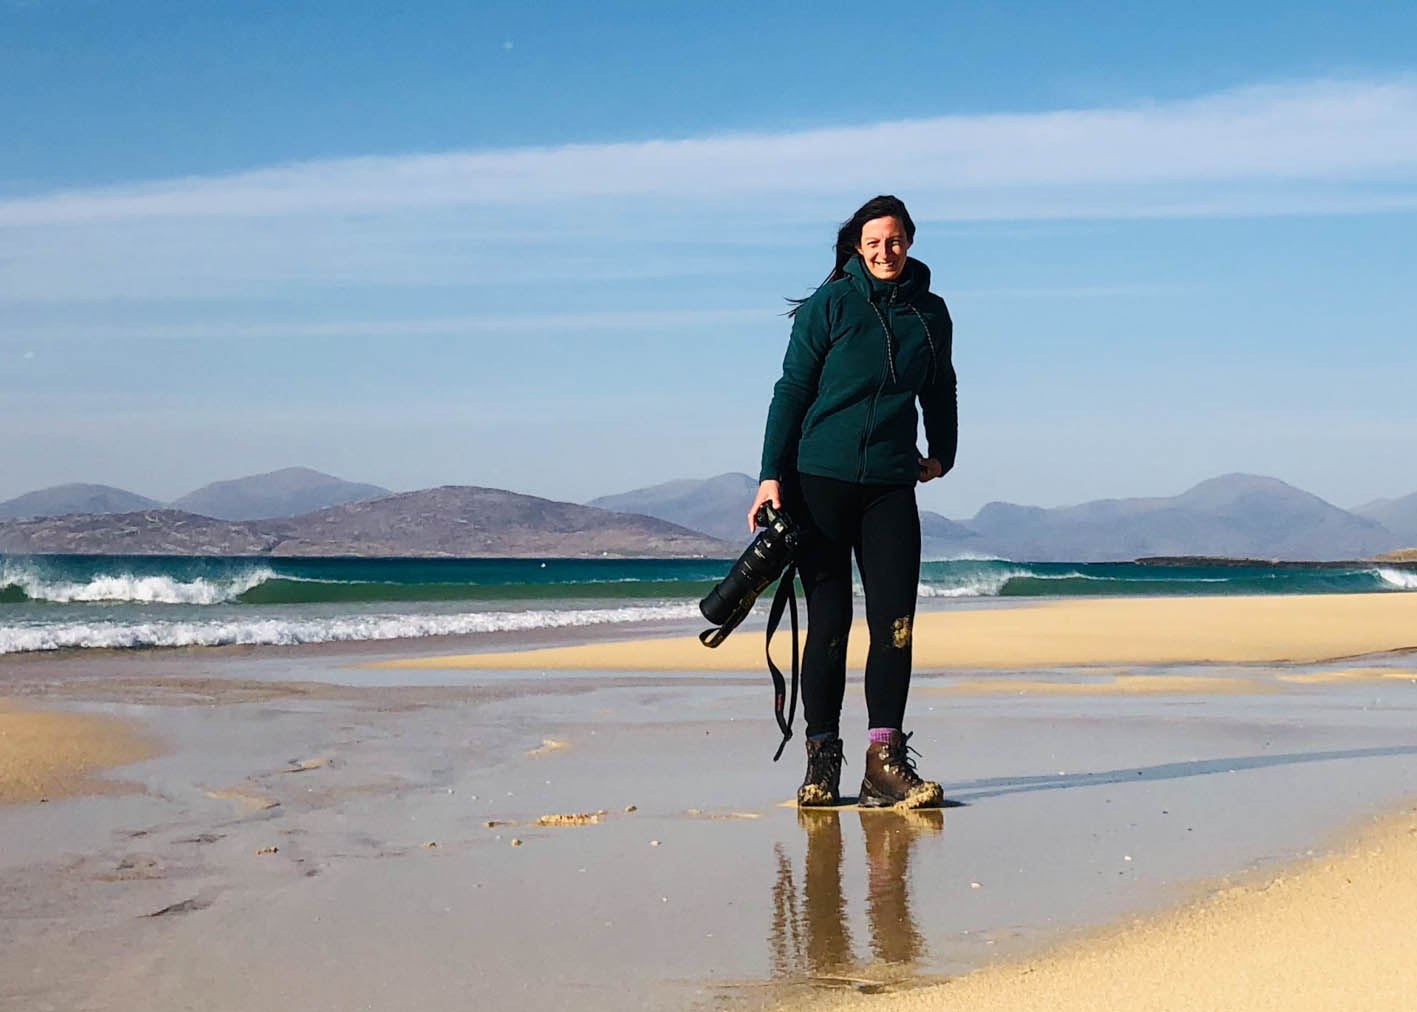 Isle of Harris photographer Margaret Soraya holding a camera and standing on the beach. Margaret offers one to one tuition and creative mentoring.